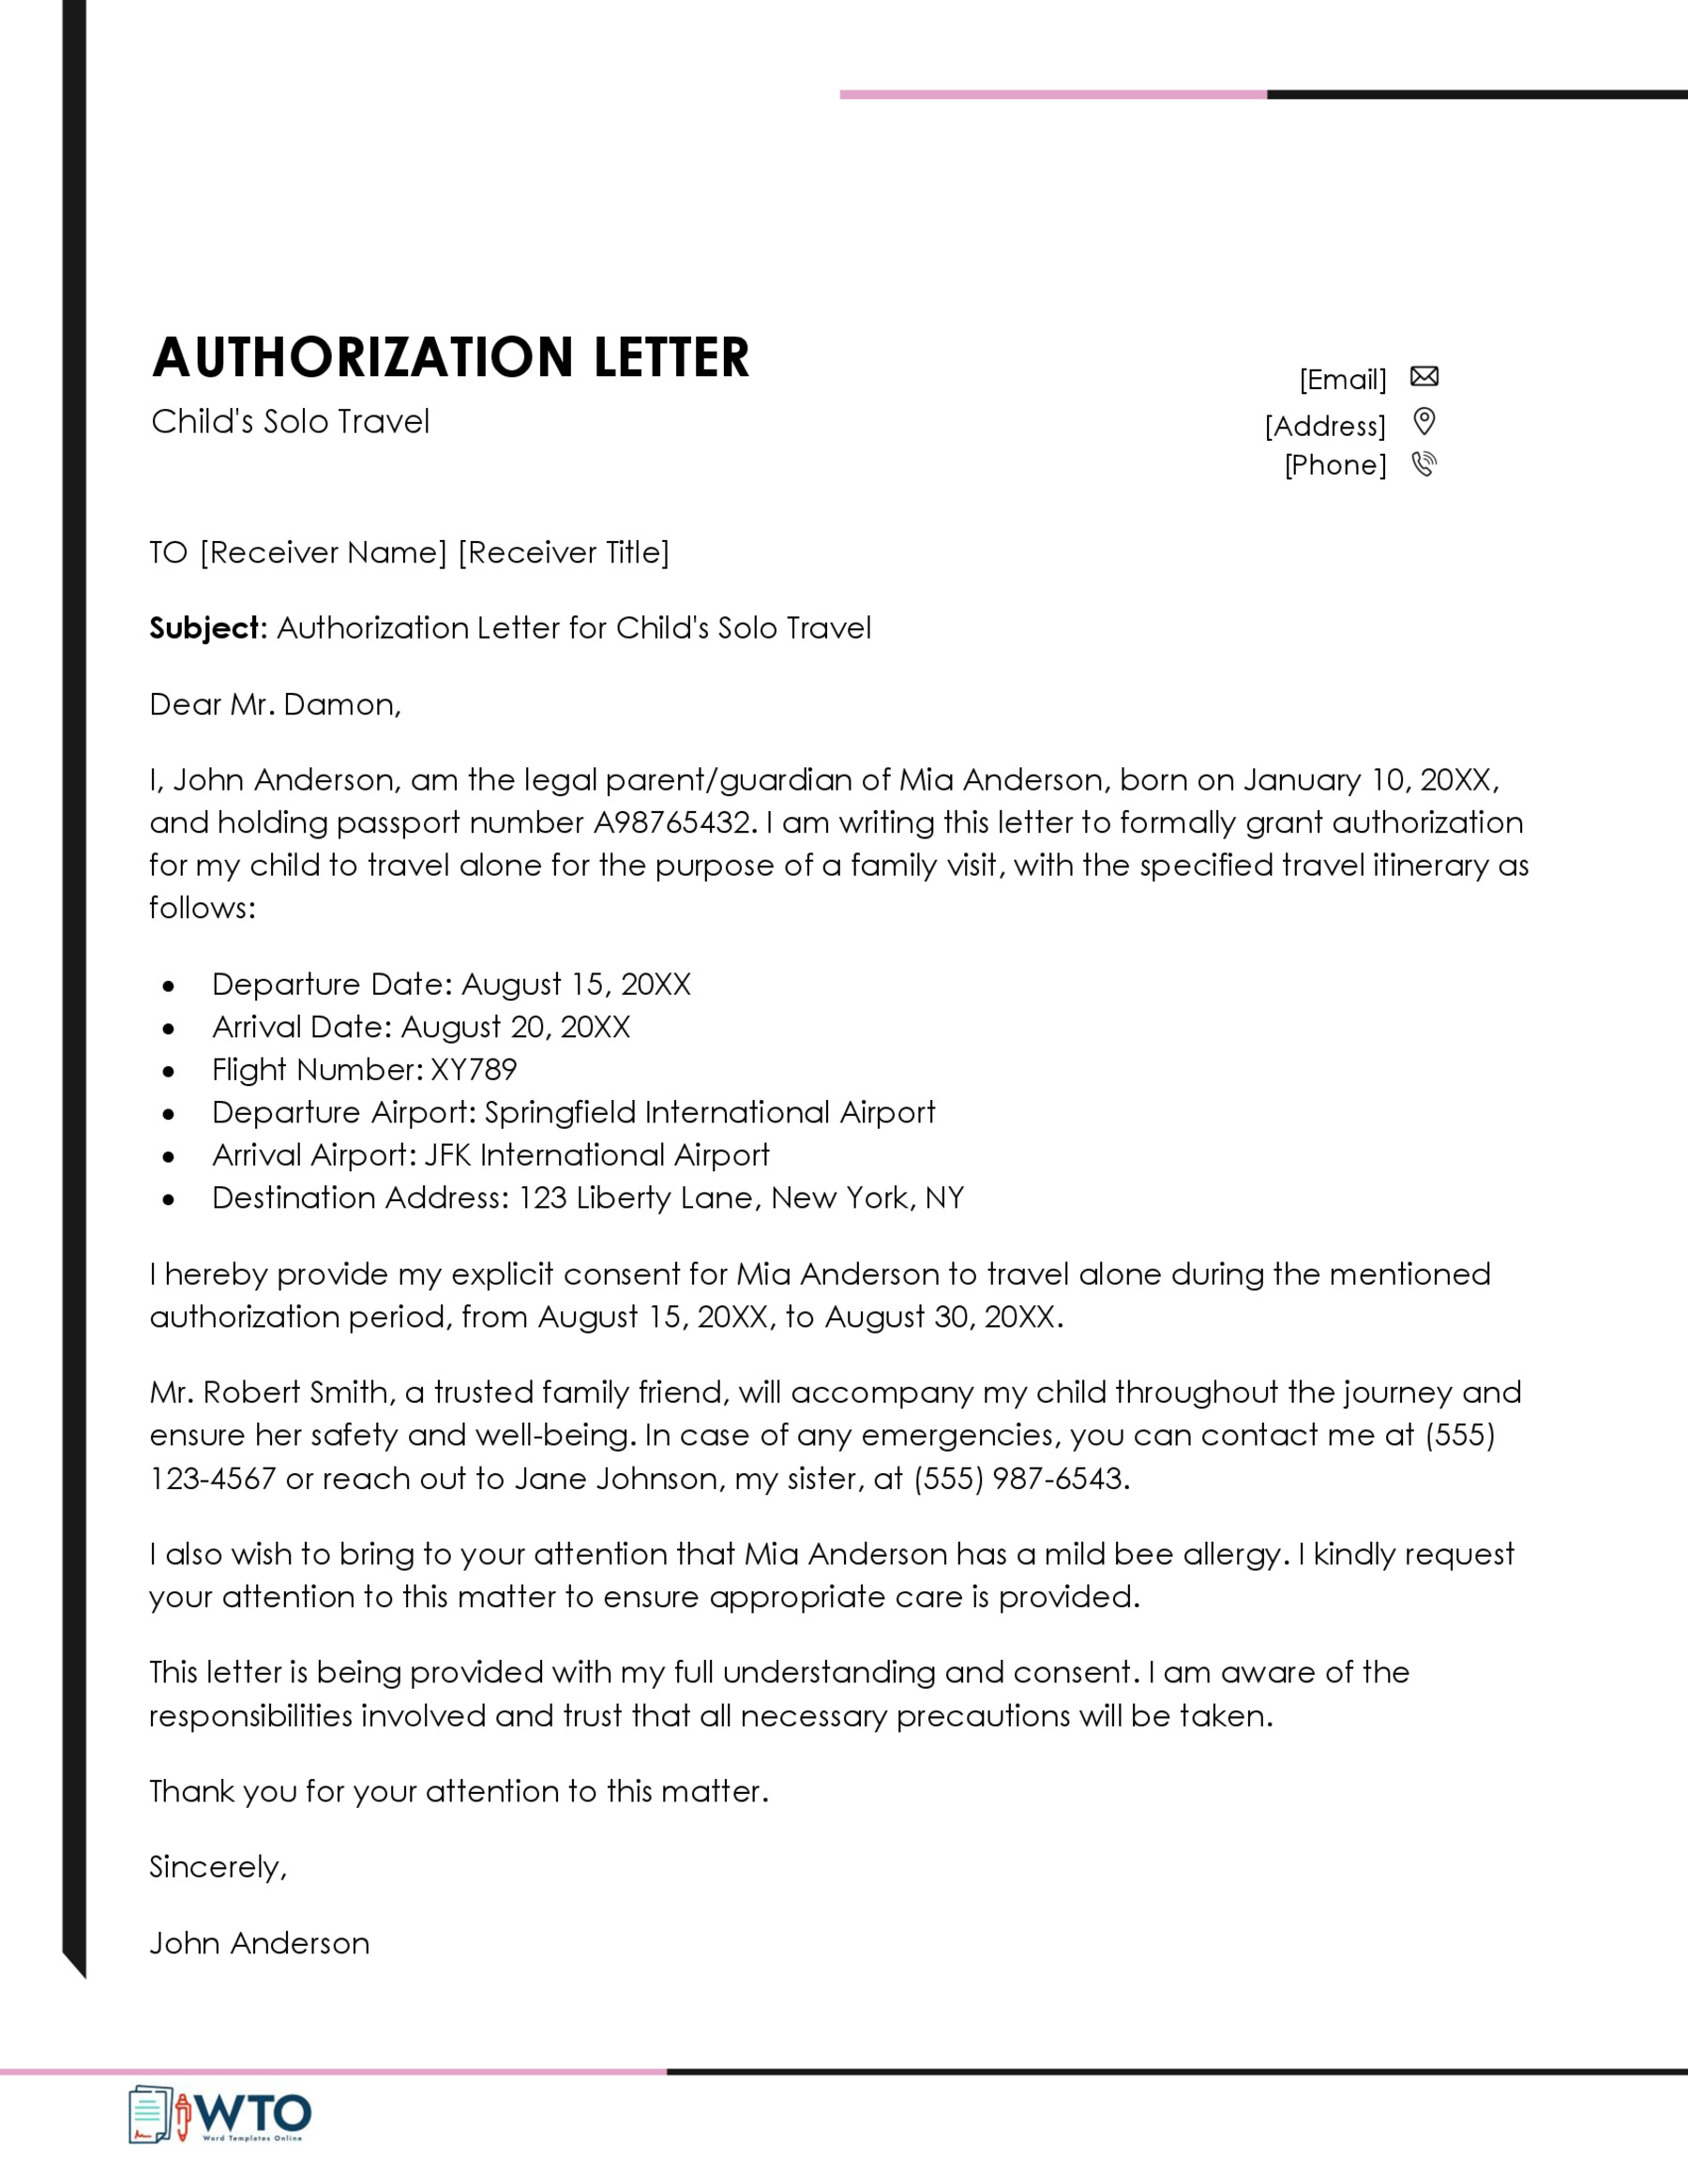 Authorization Letter for a Child to Travel Alone Template